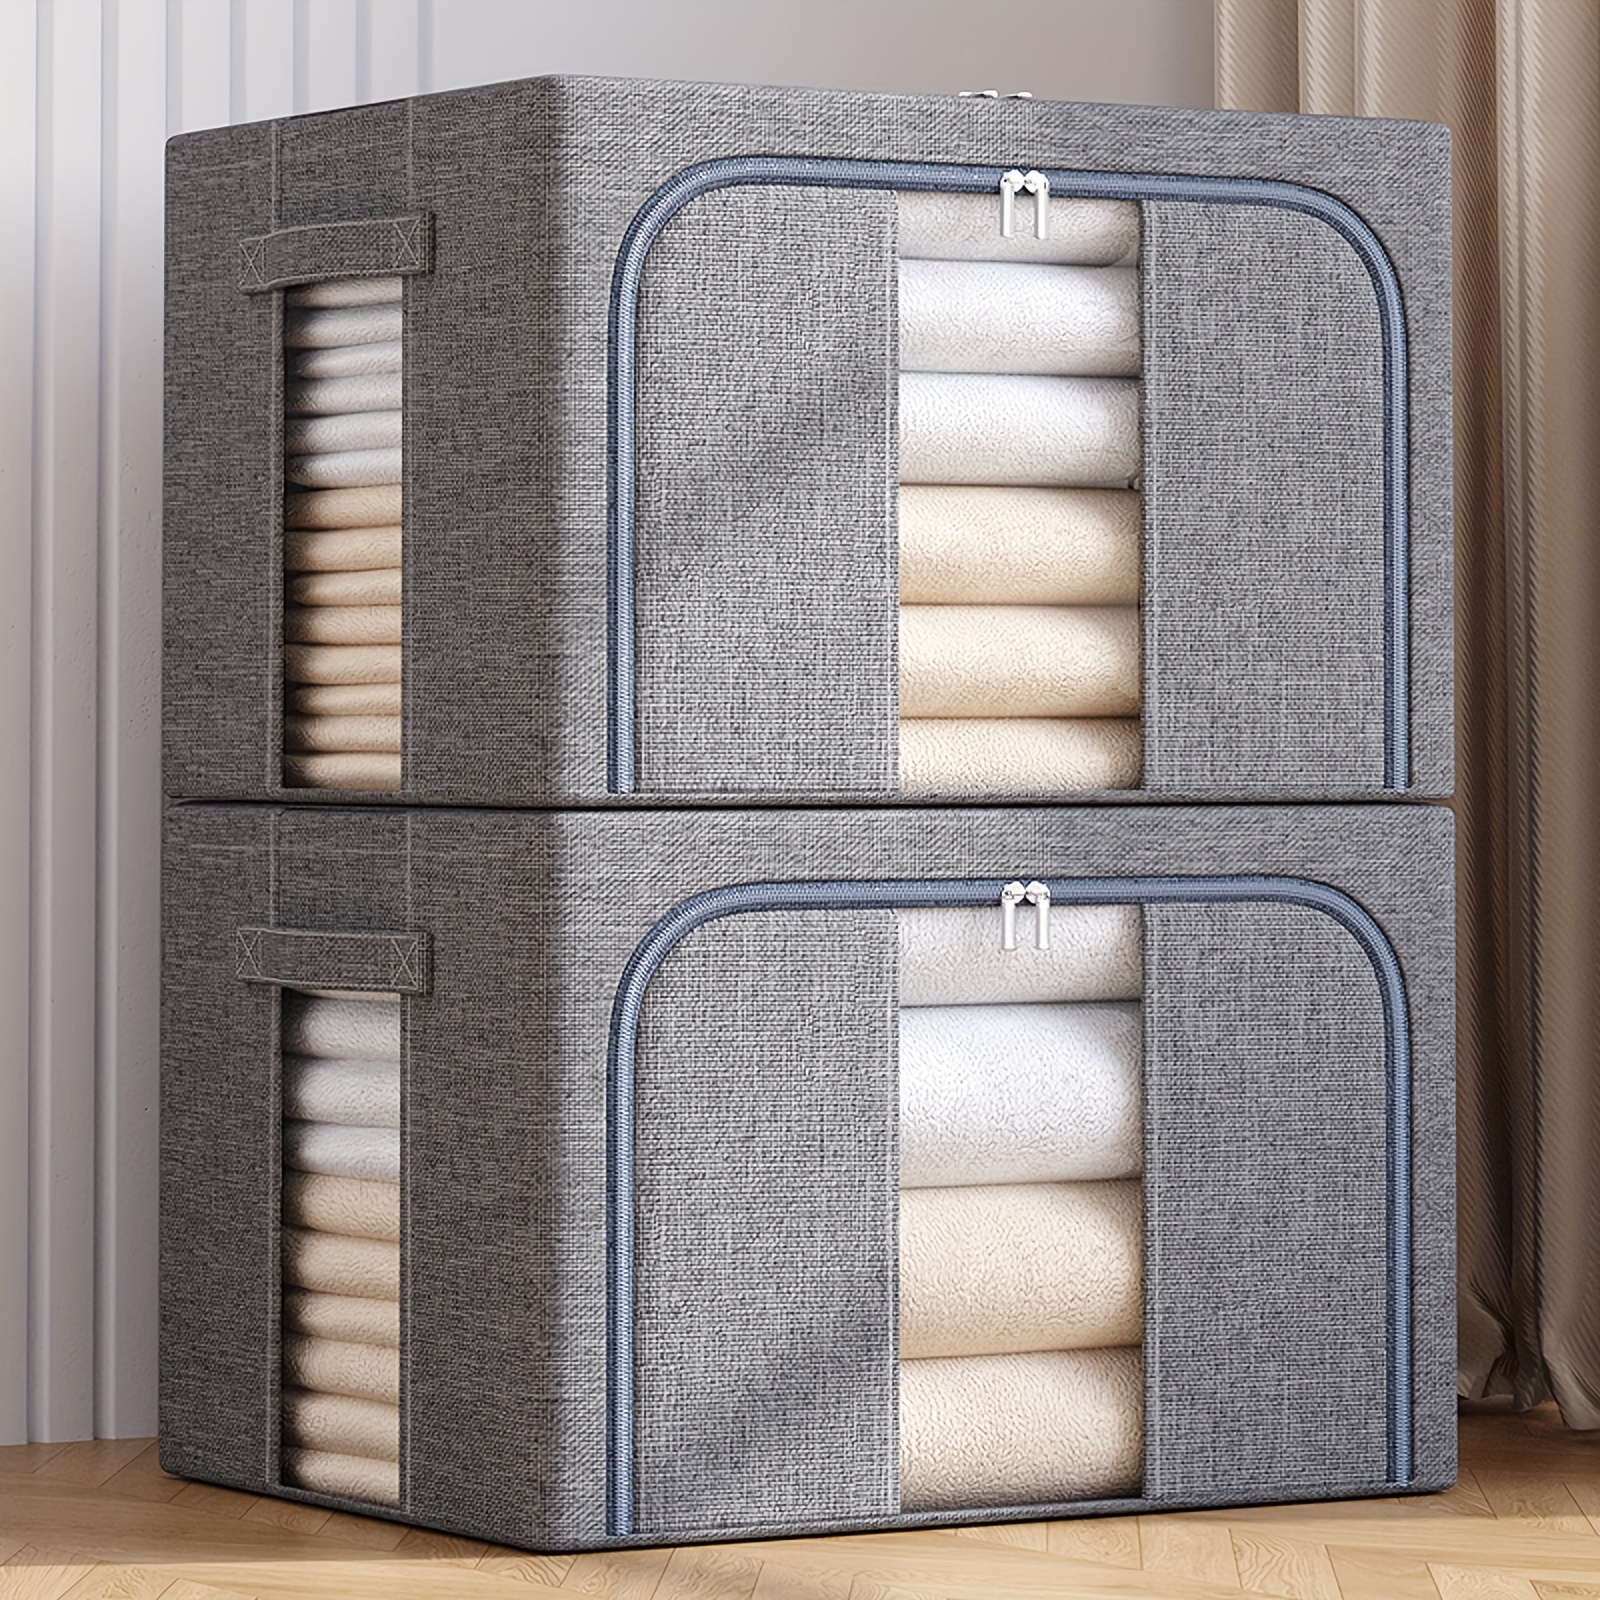 

1pc Foldable Clothing Storage Box, Large Capacity Organizer With Visual Window, Can Be Used For Storing Clothes, Pants, Quilts, Bedding, Toys, Etc